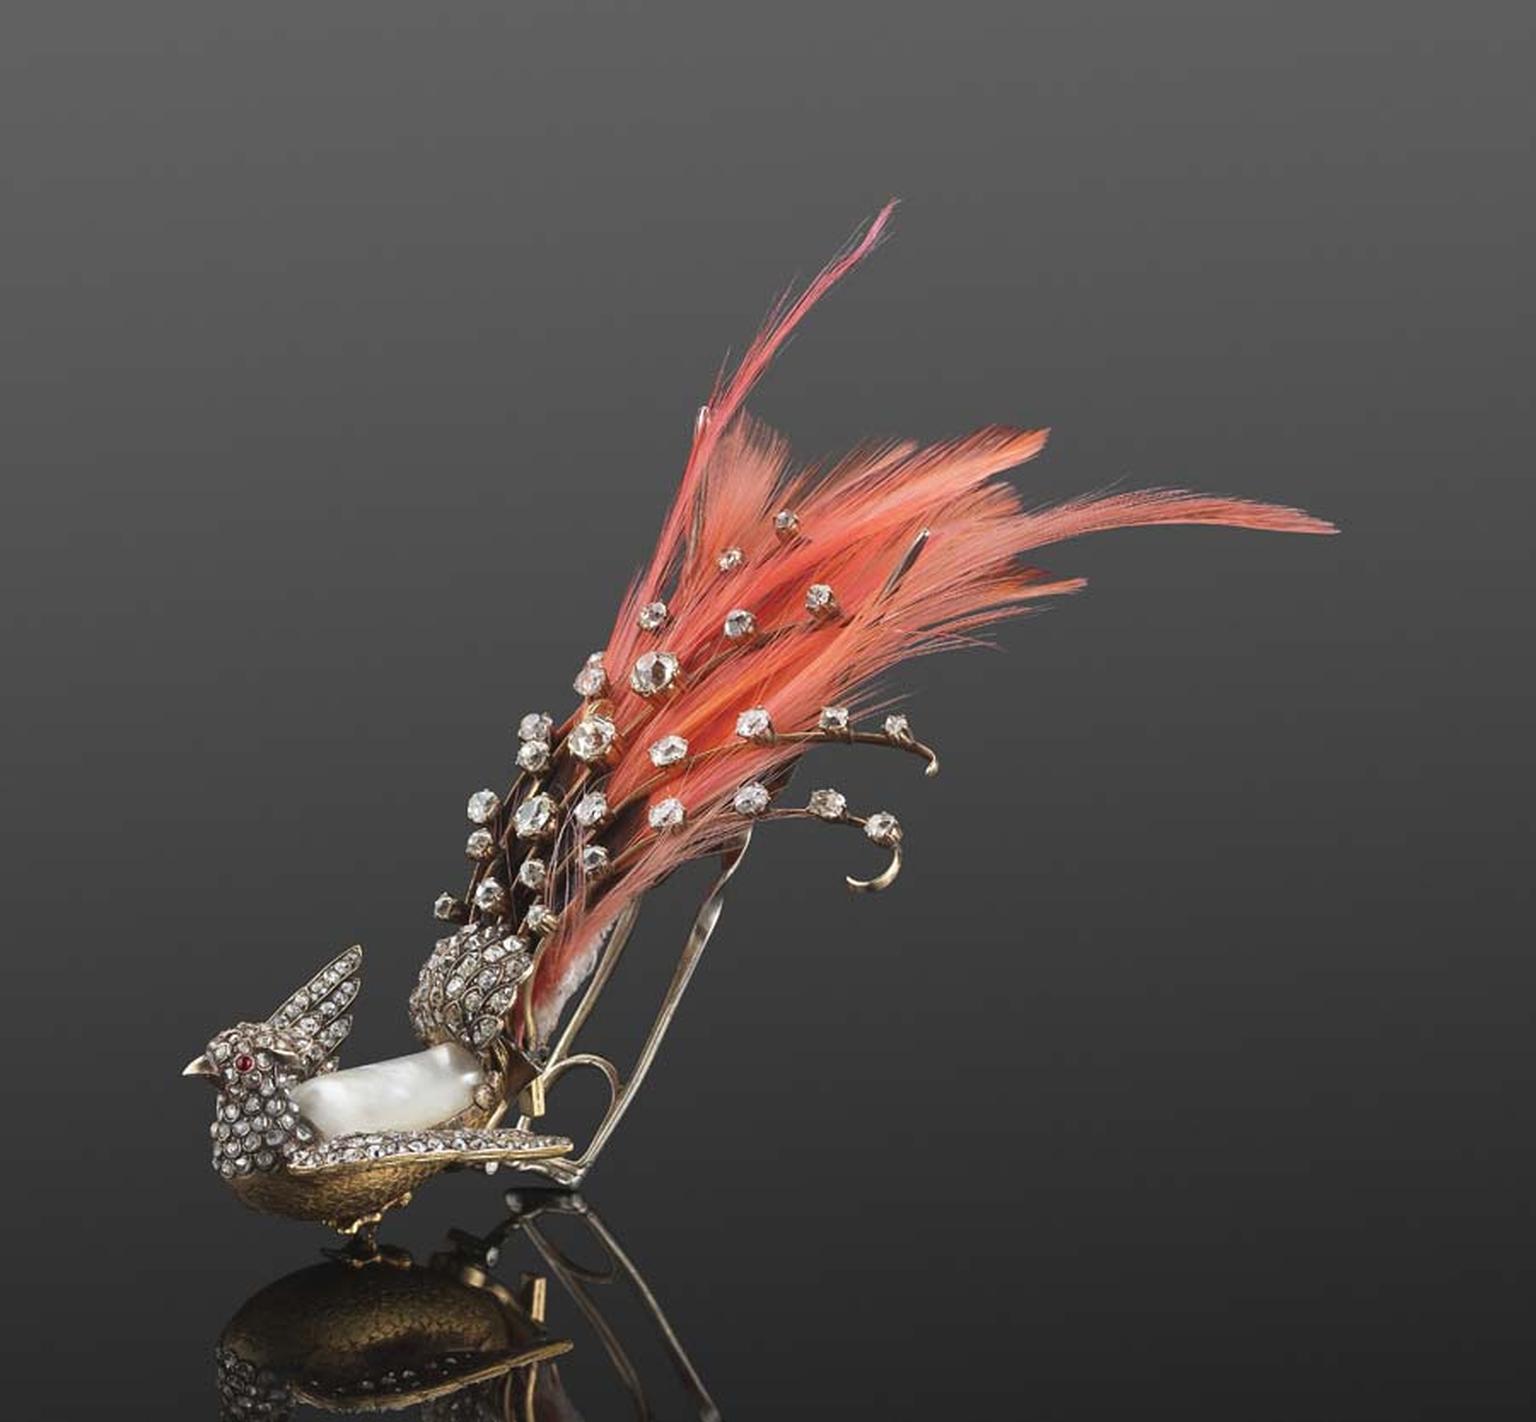 19th century diamond, ruby and pearl bird aigrette hair ornament with feathers, sold at Fred Leighton's store in Manhattan.